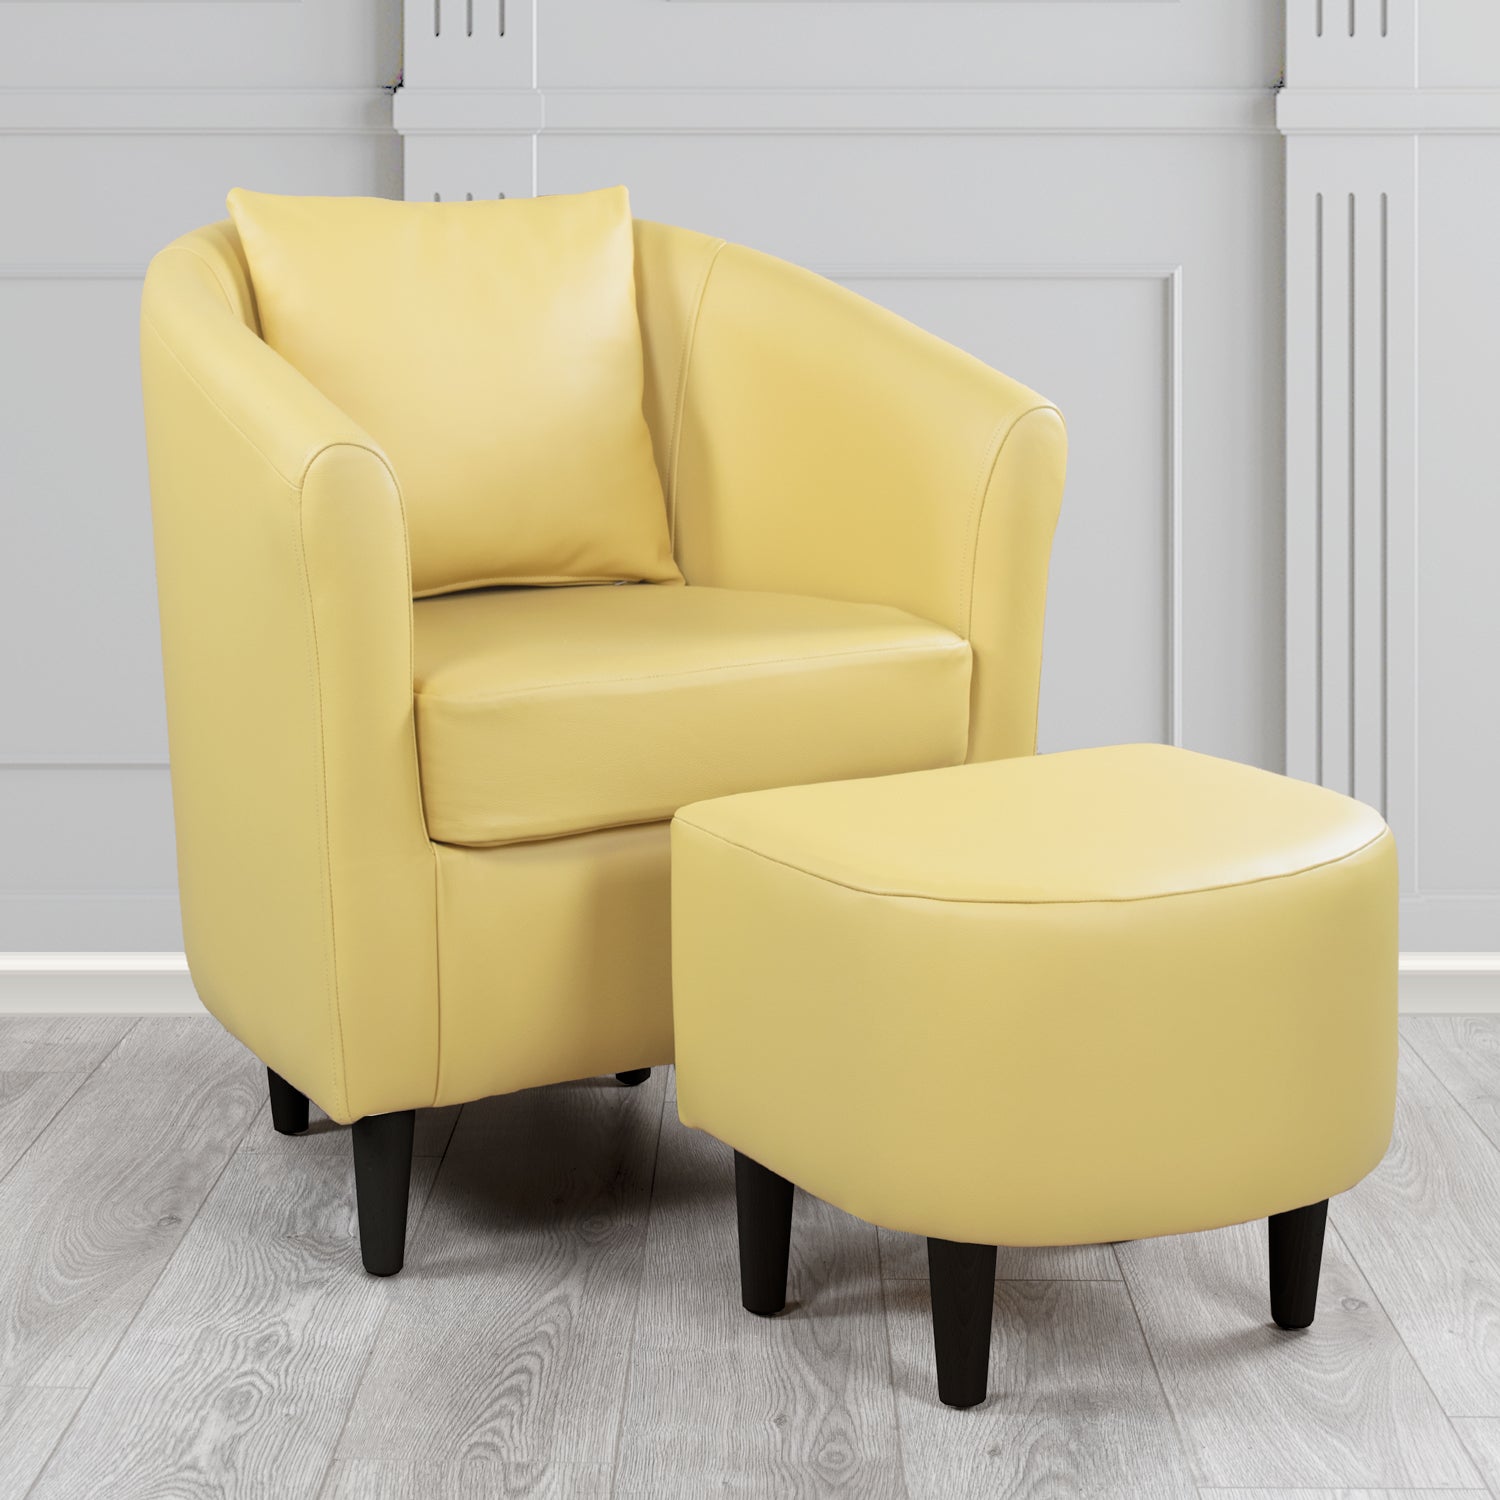 St Tropez Shelly Angel Crib 5 Genuine Leather Tub Chair & Footstool Set With Scatter Cushion (6619464564778)